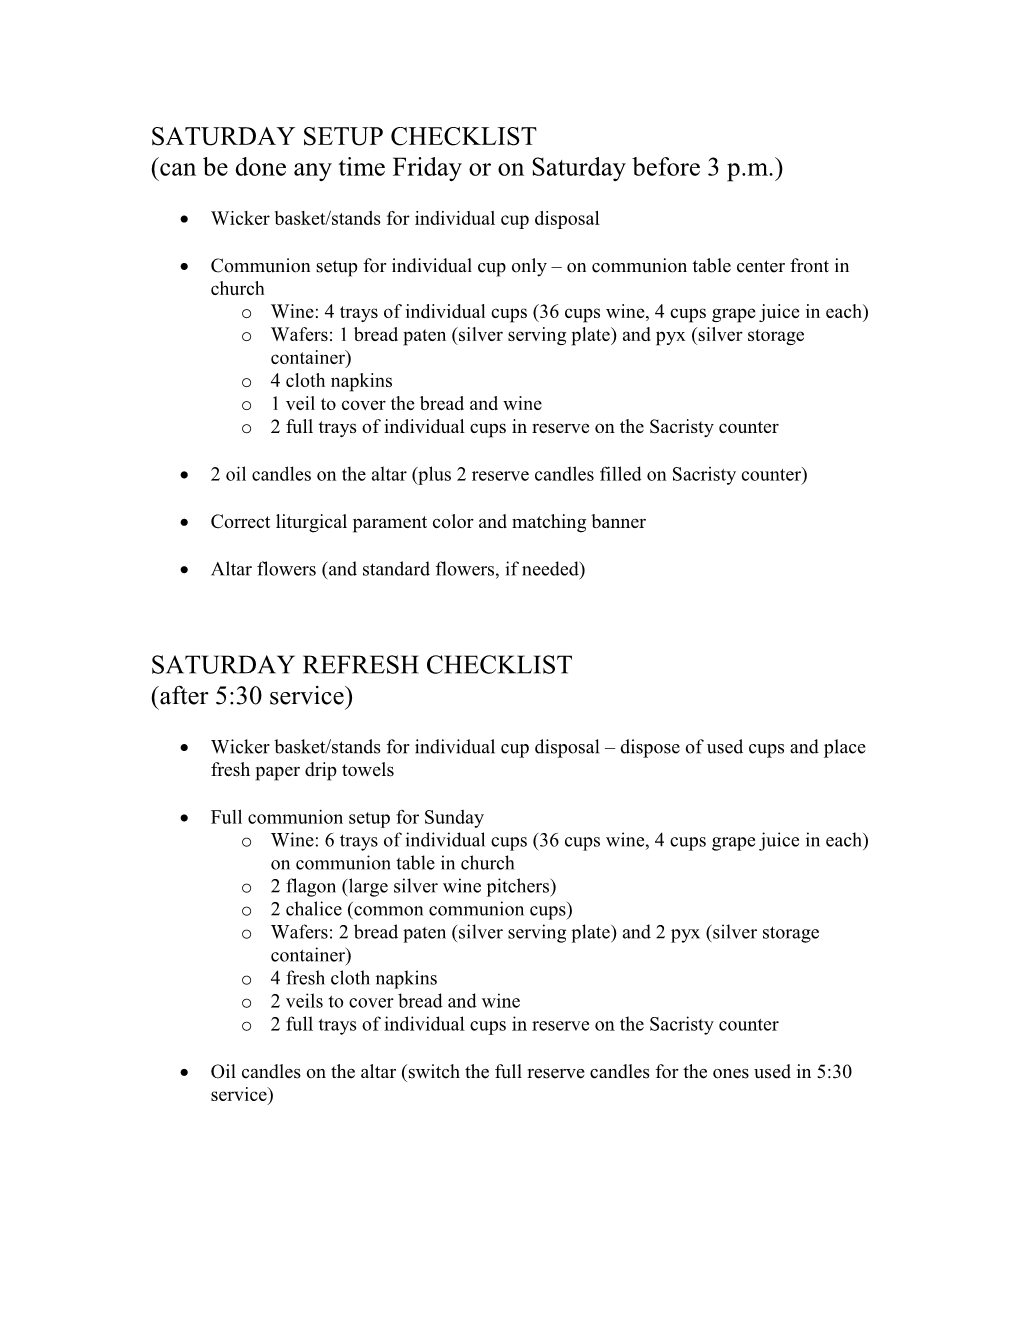 SATURDAY SETUP CHECKLIST (Can Be Done Any Time Friday Or on Saturday Before 3 P.M.)